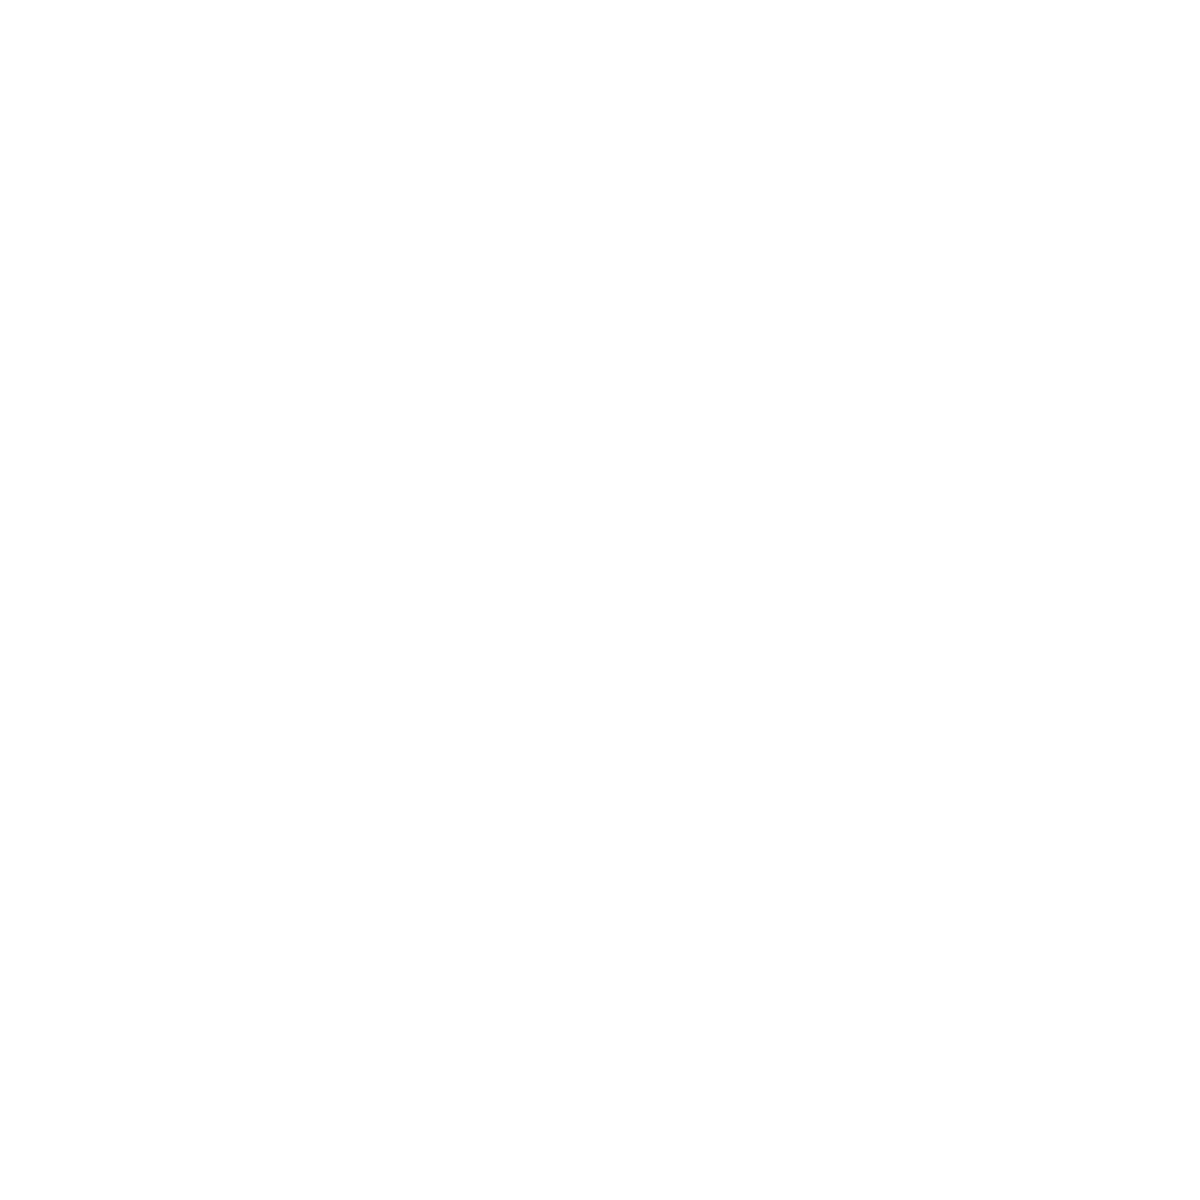 Creative Commons licenses Royalty-Free Music For Facebook Ads